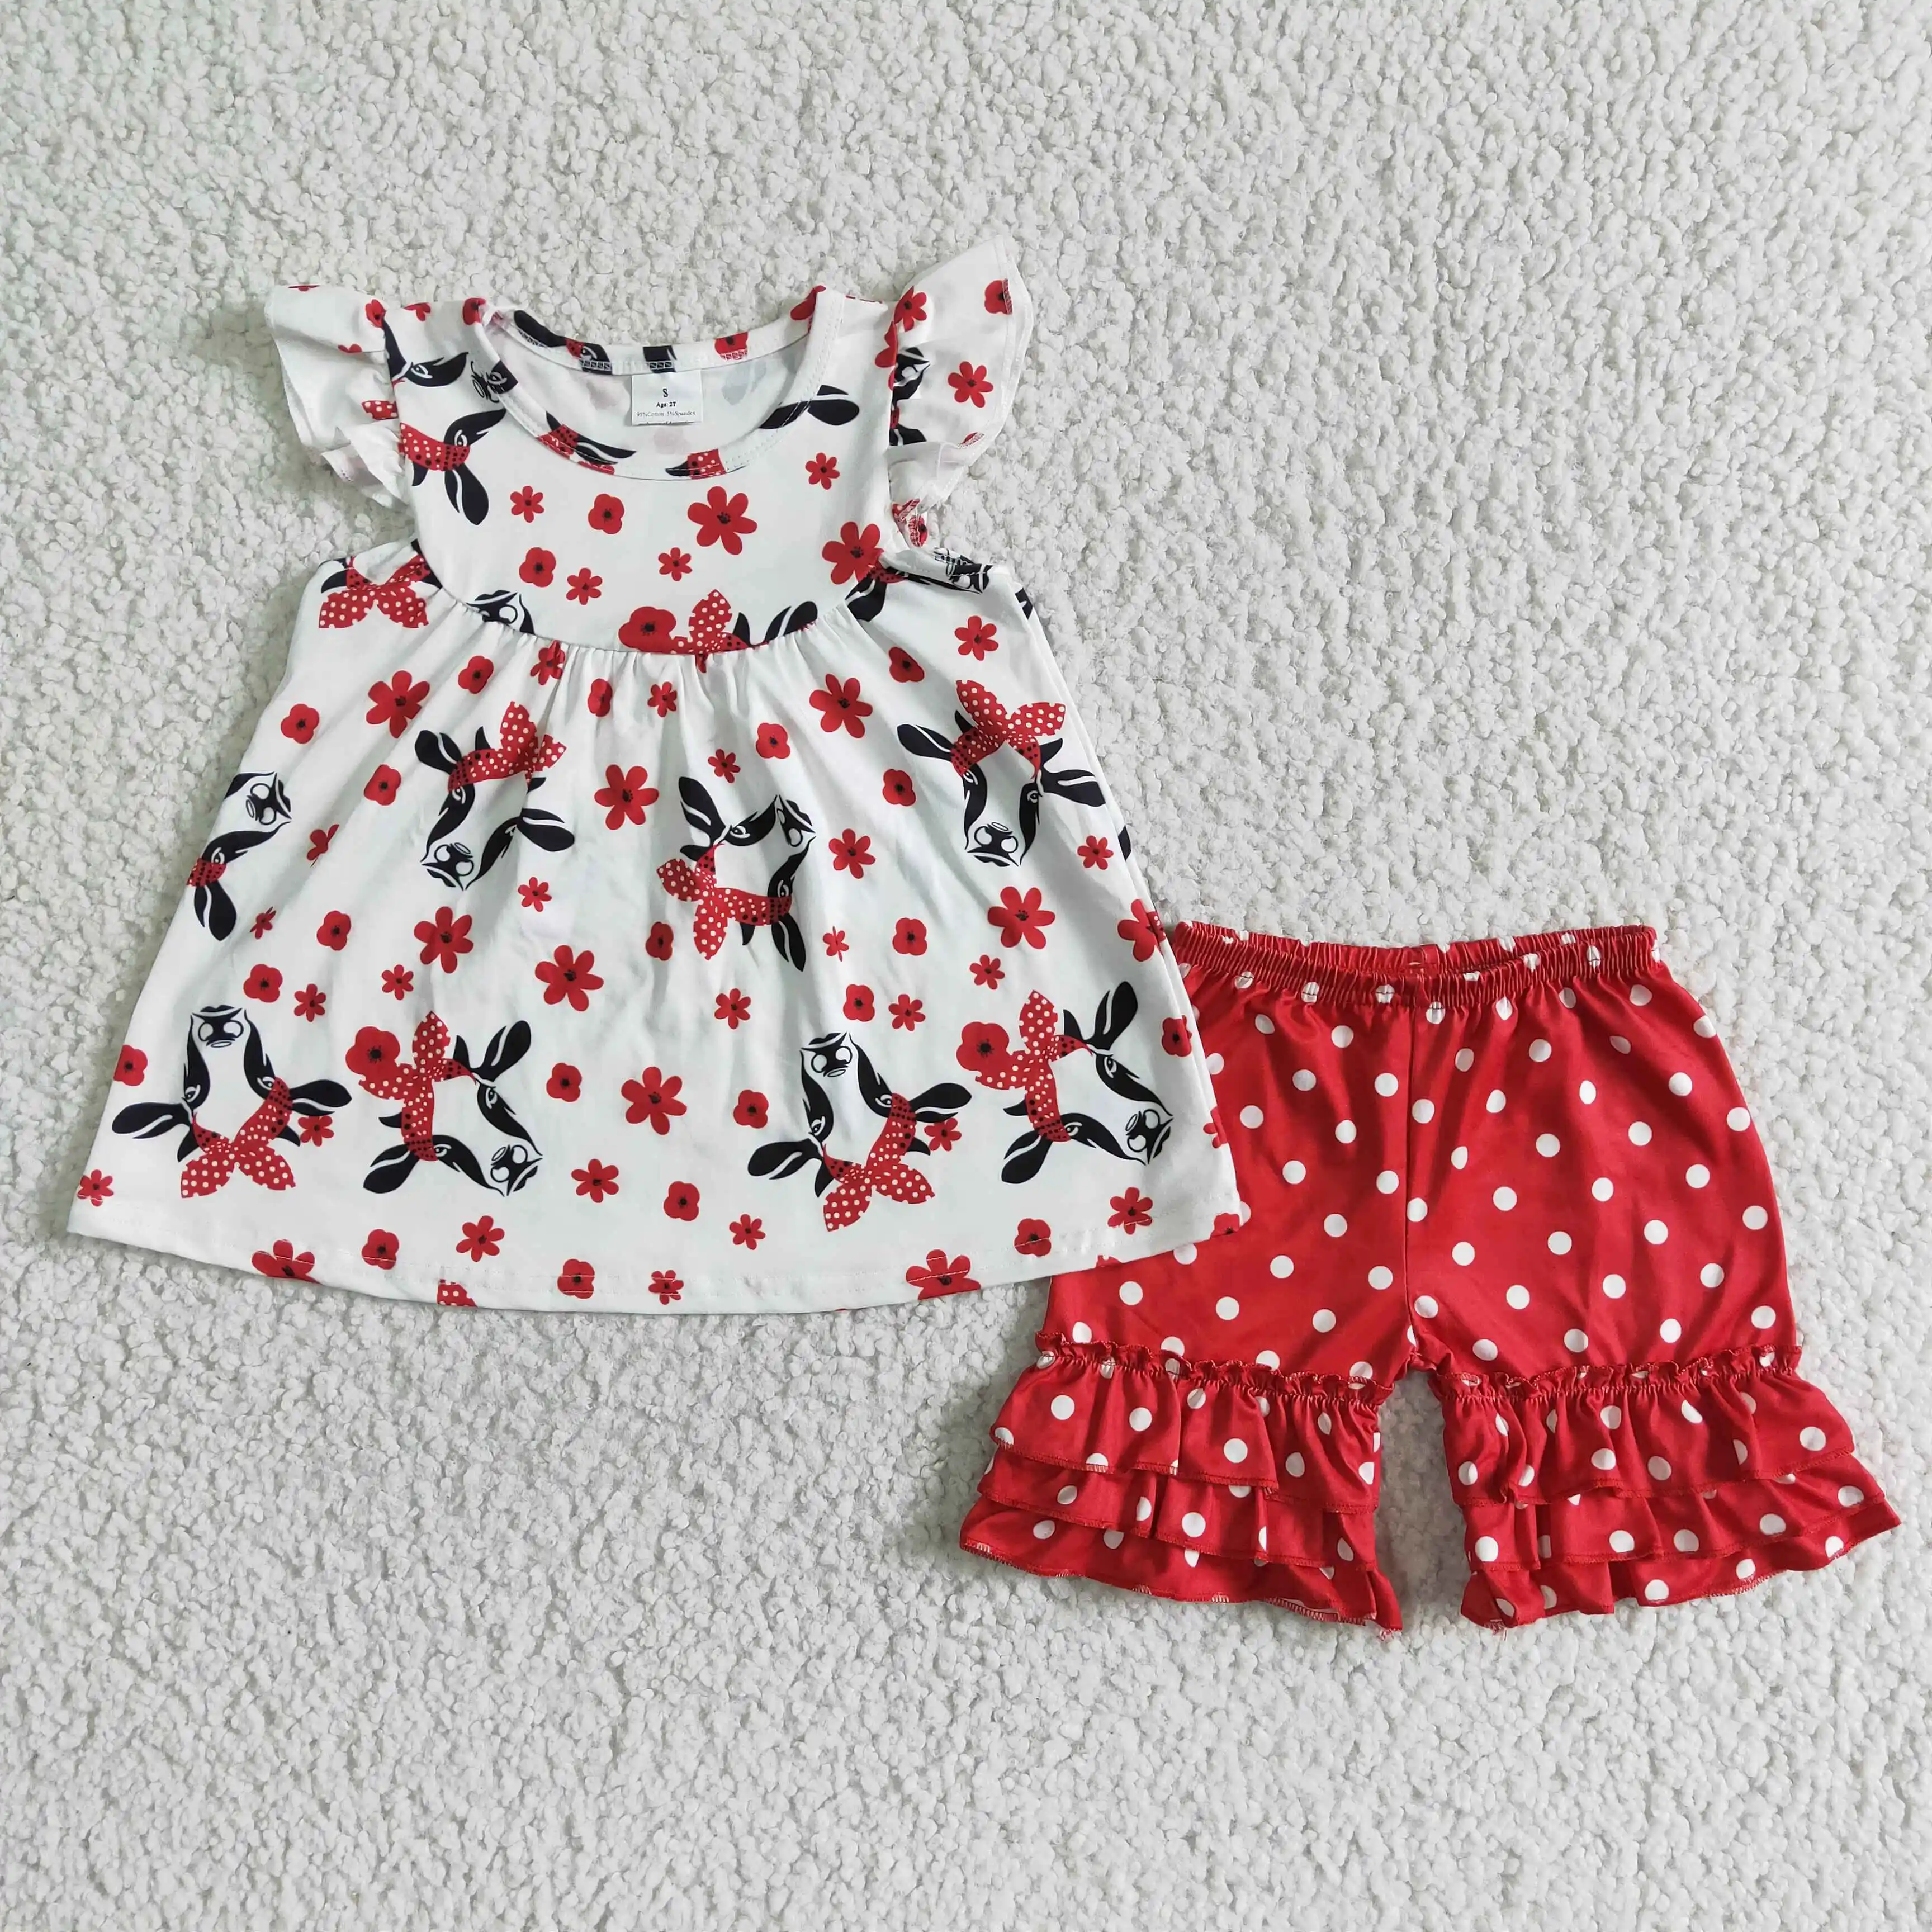 

Boutique girls' clothing sets farm cow cattle shirt with shorts two piece set flower red dots kid clothing RTS NO MOQ